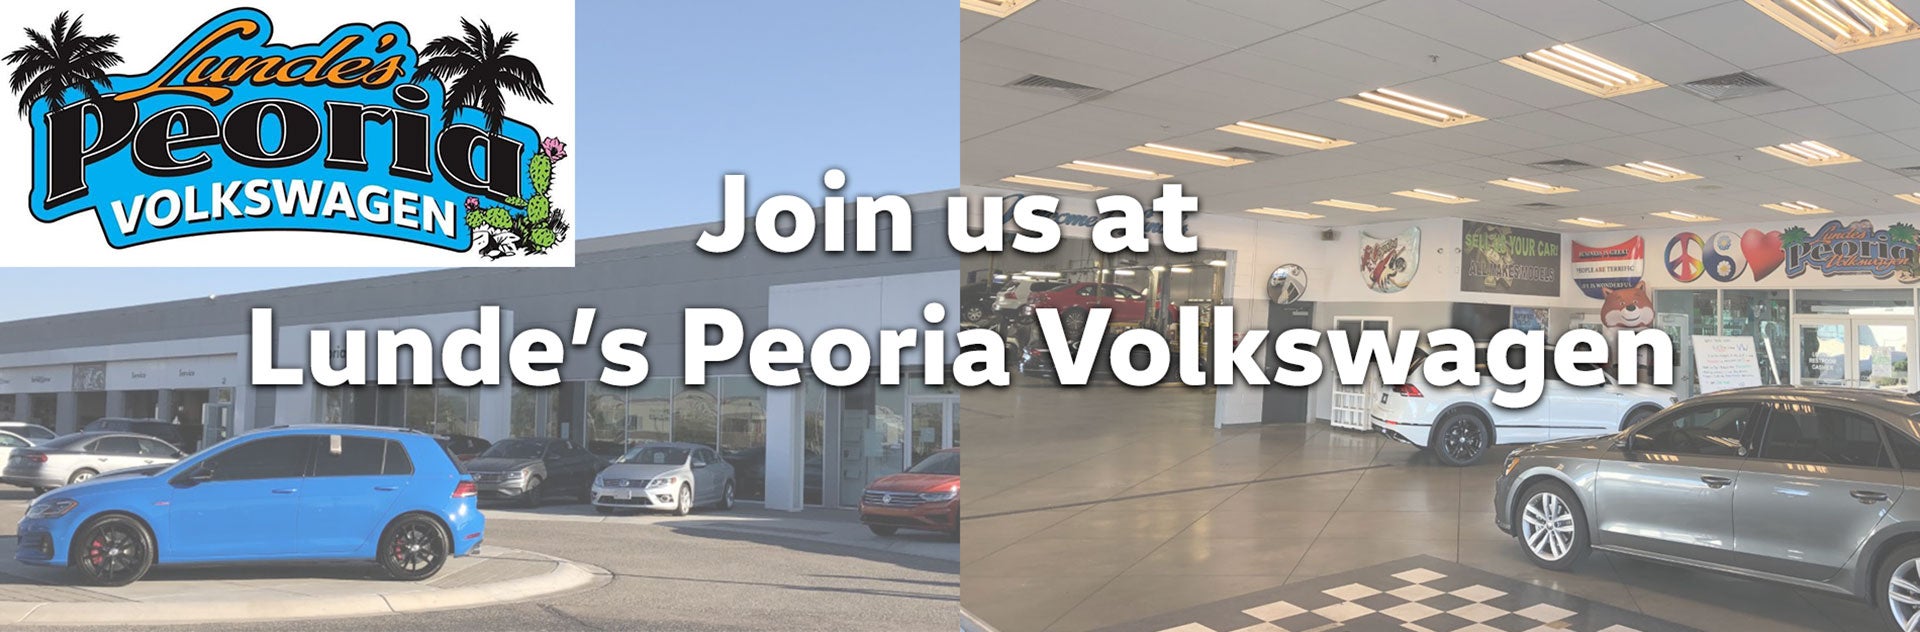 Join Us At Lunde's Peoria Volkswagen